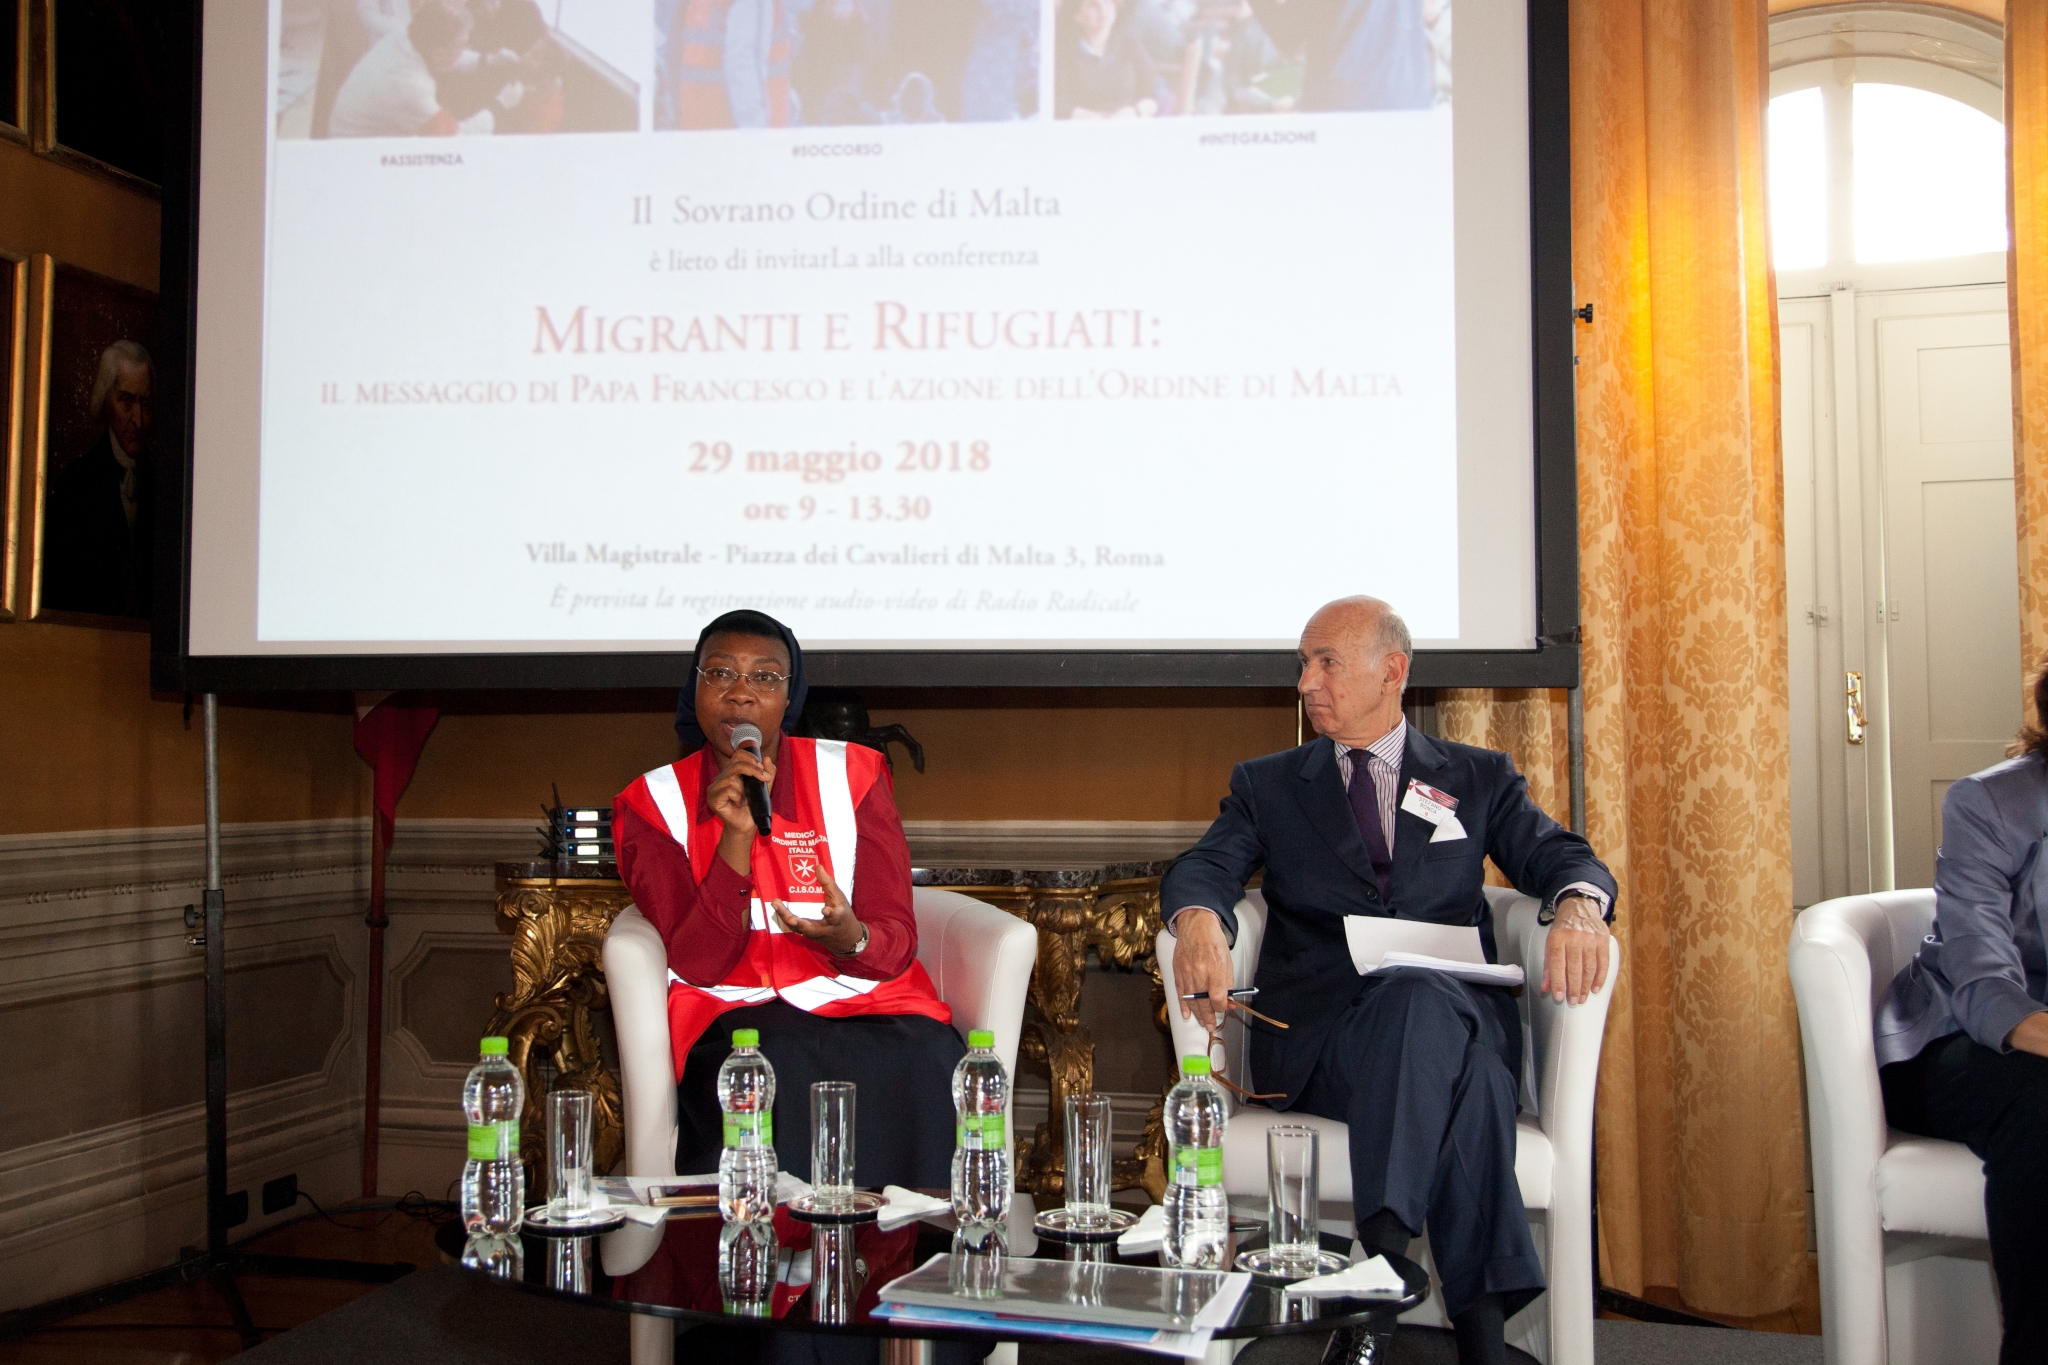 “Migrants and Refugees” conference in Rome, Pope Francis’ message and the Order of Malta’s action